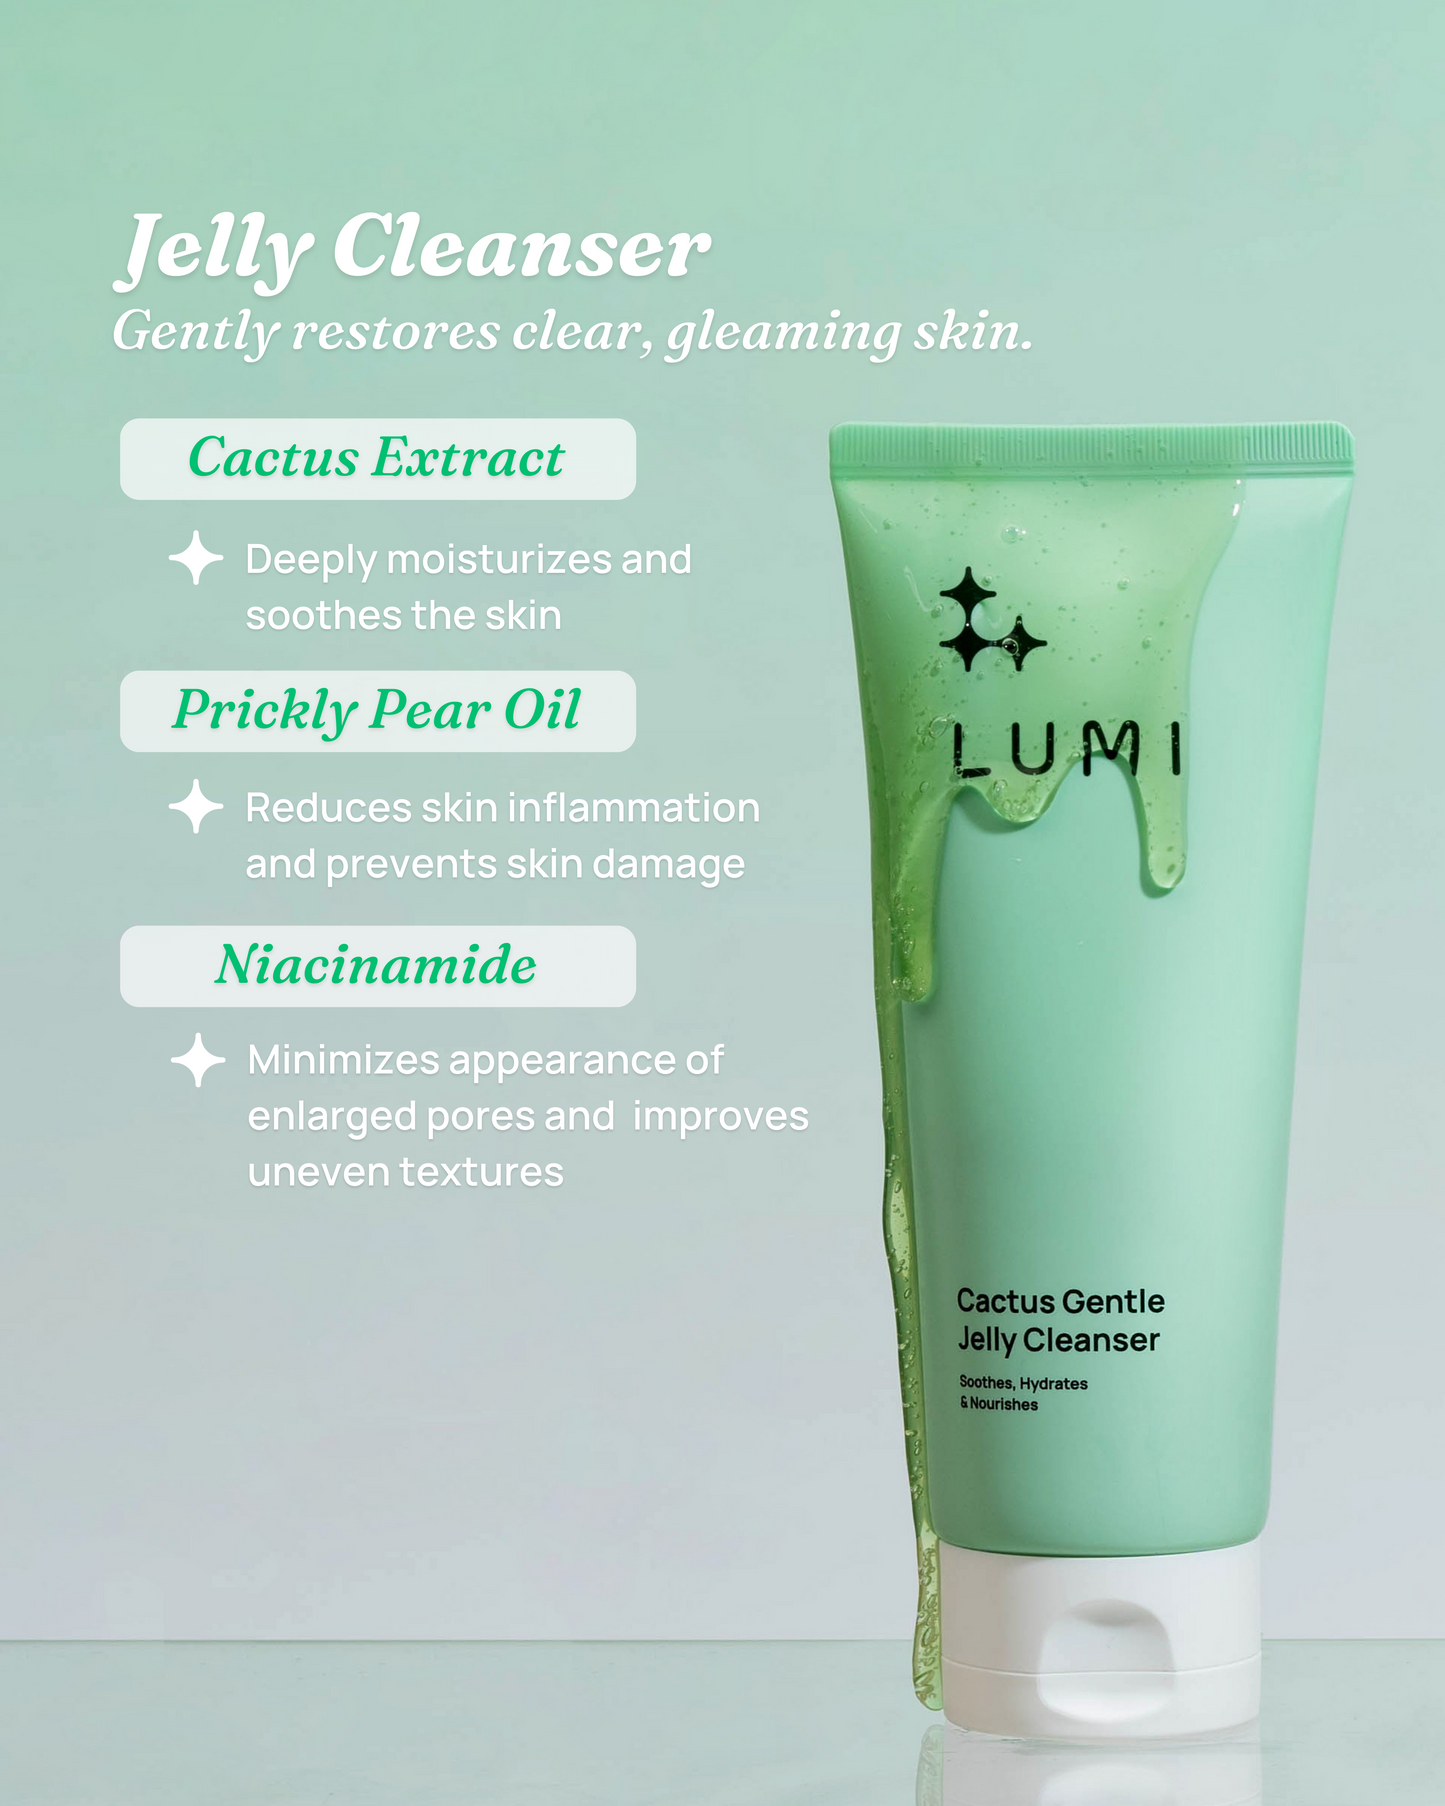 Cactus Gentle Jelly Cleanser